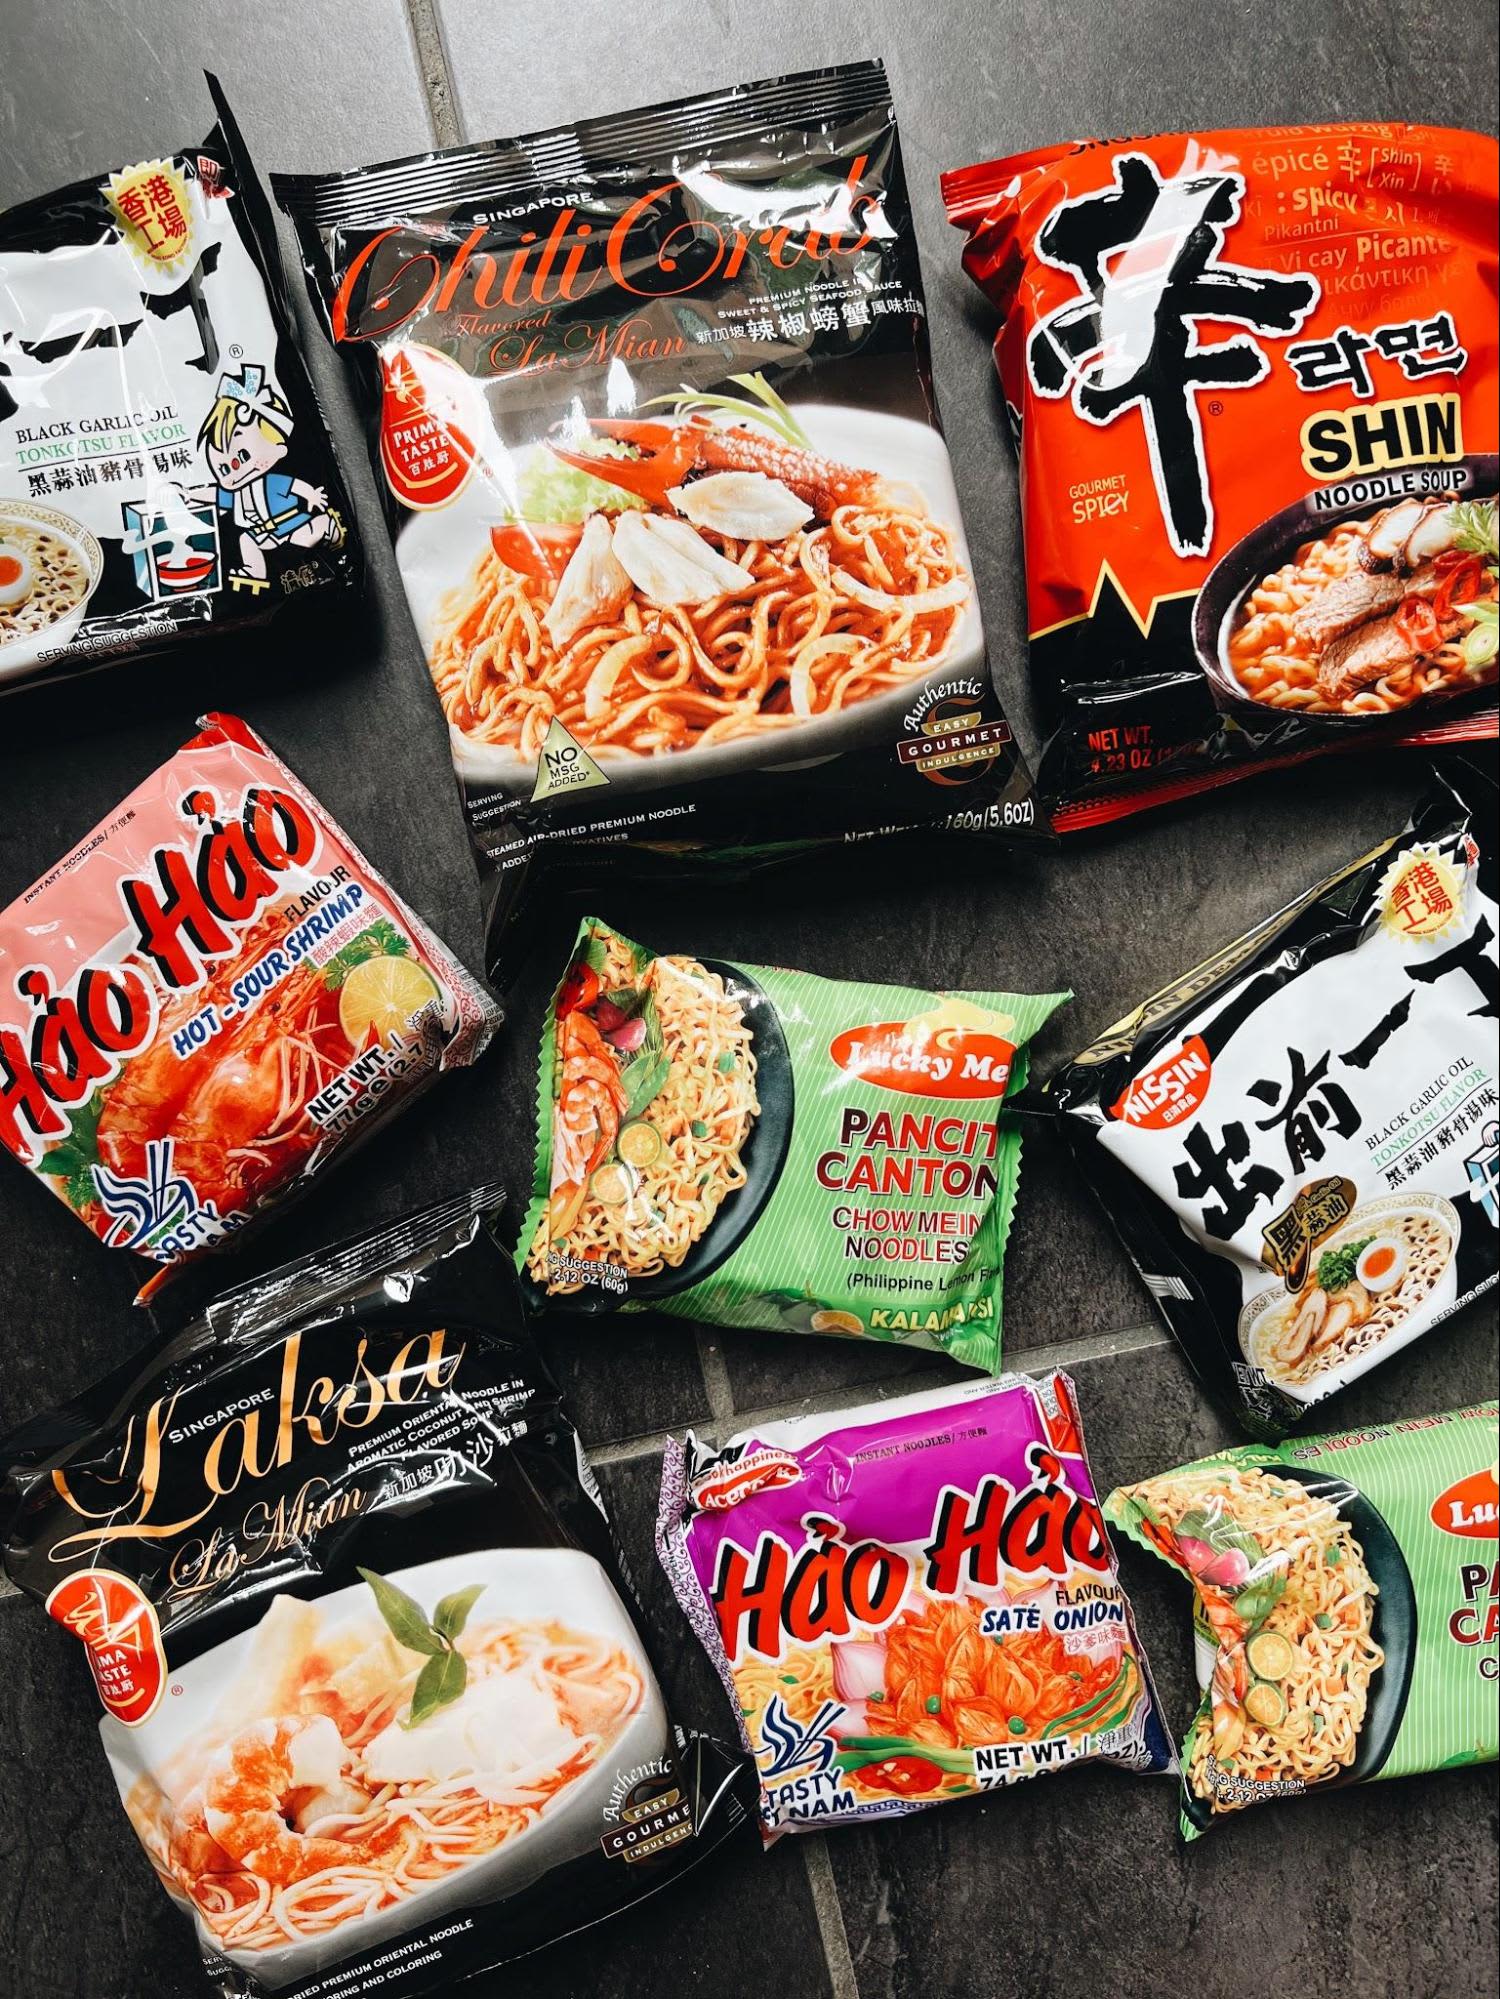 Ramen Seasoning Packets Are the Flavor-Boosting Secret Your